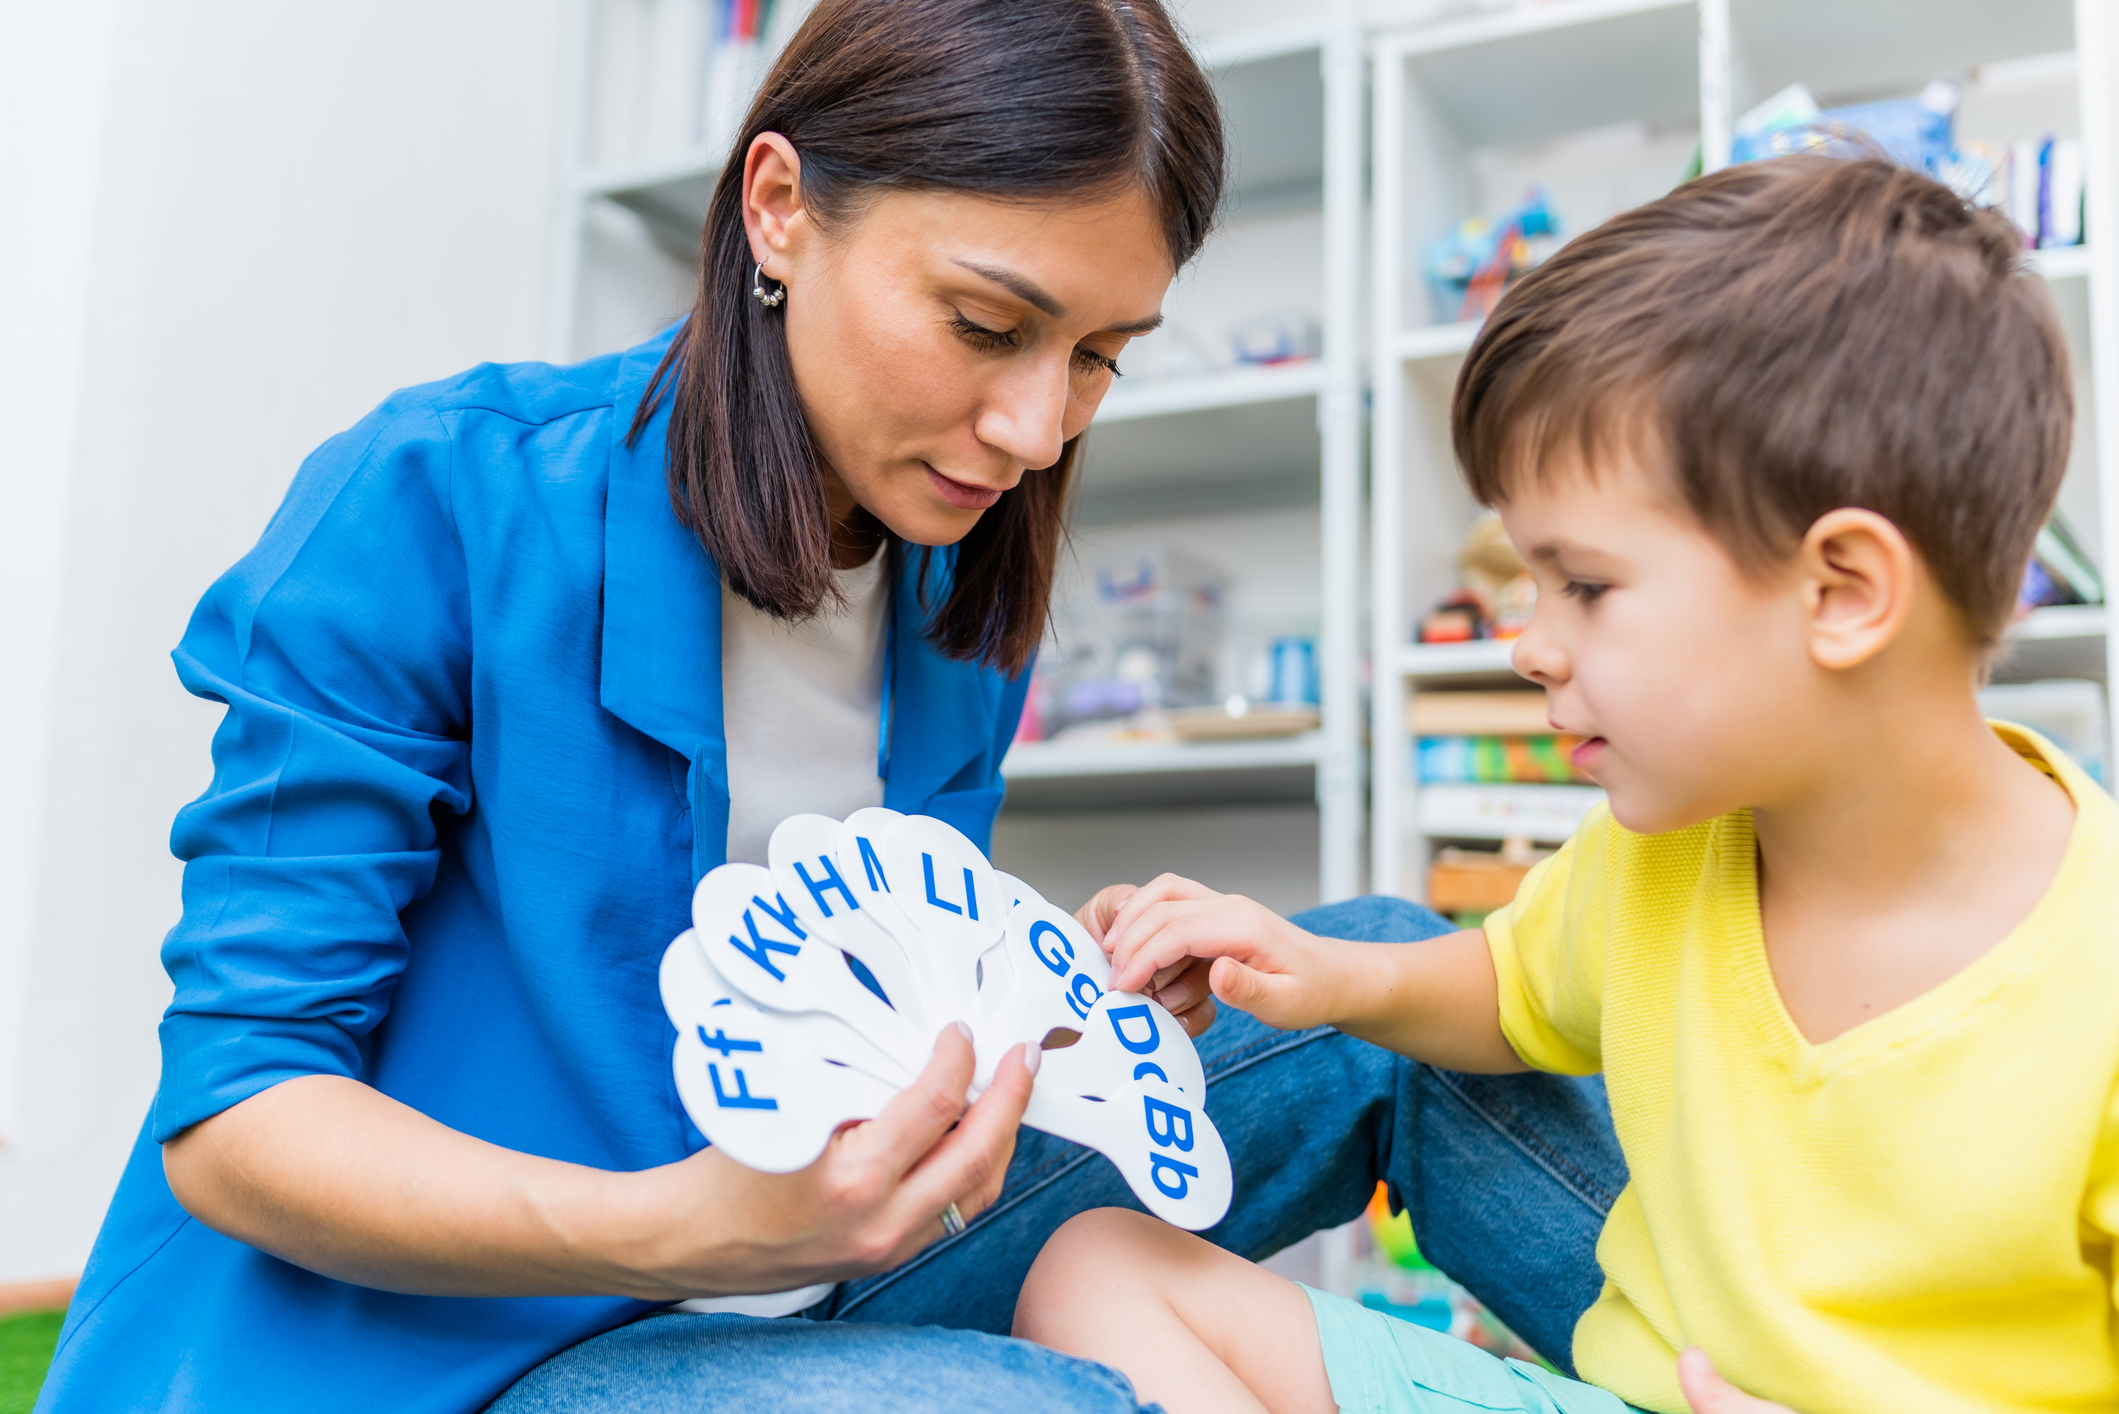 child with a speech therapist is taught to pronounce the letters, words and sounds correctly.